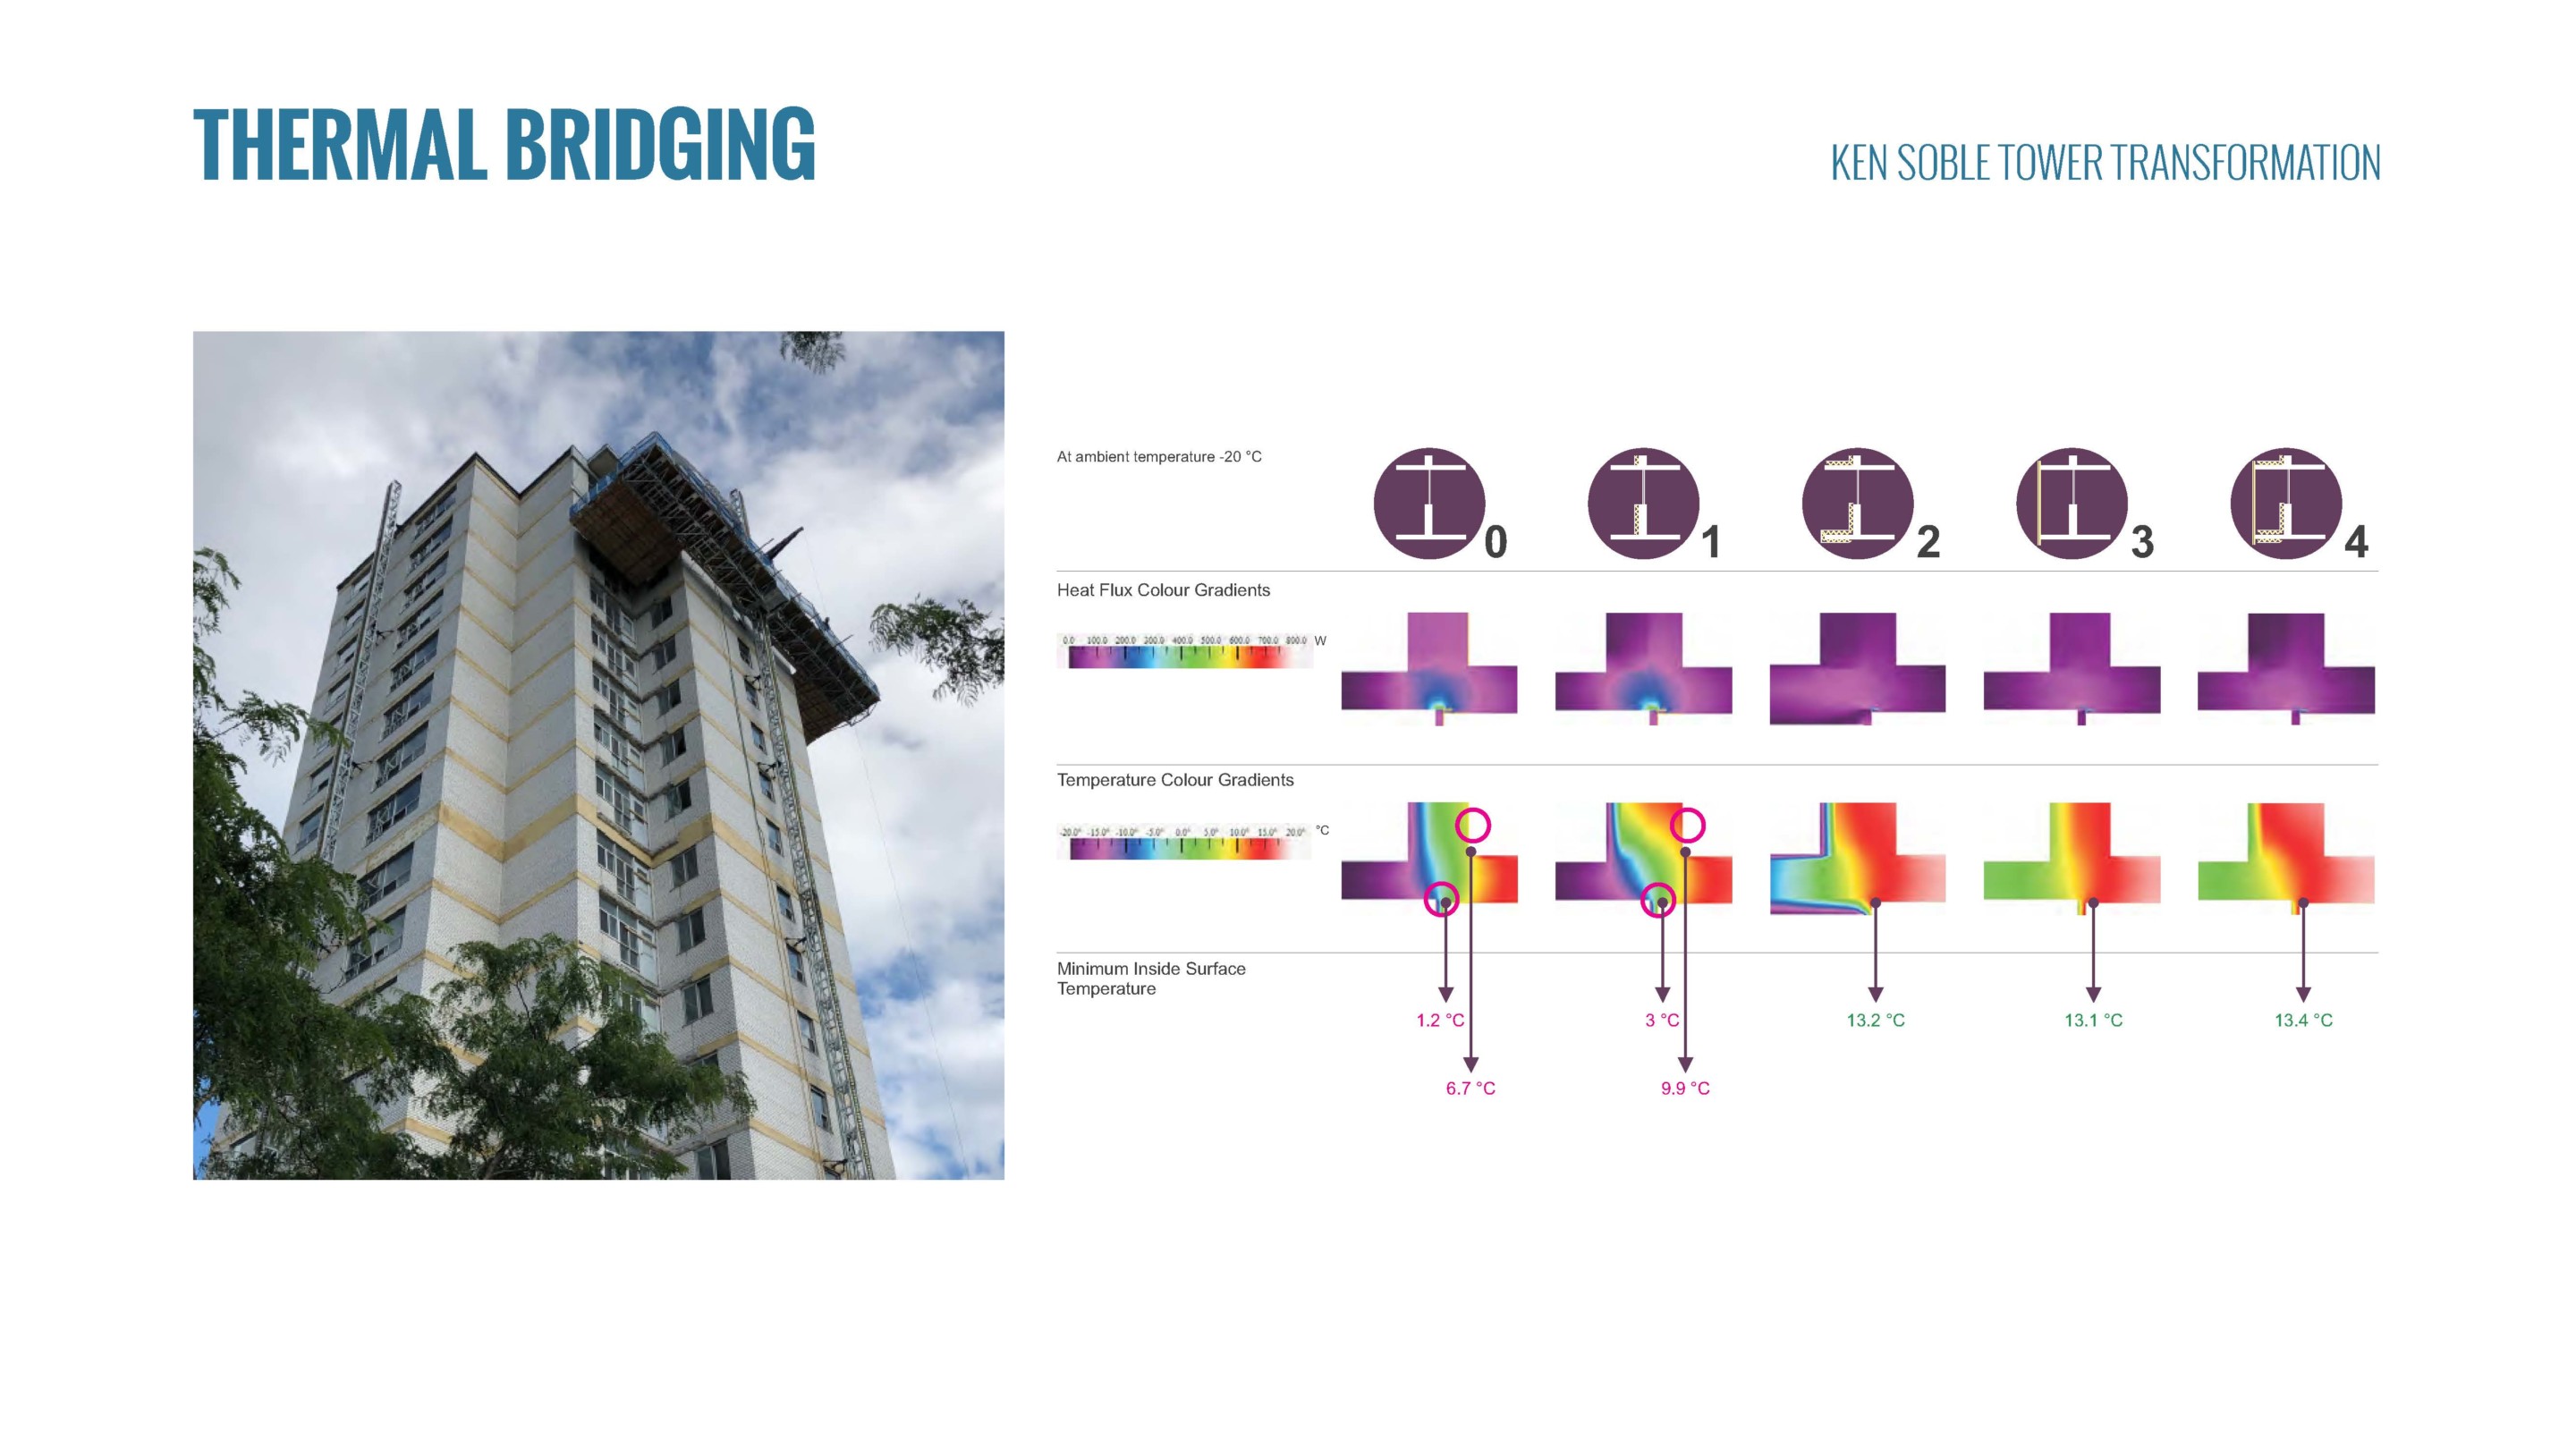 Diagram of thermal bridging on a tower facade